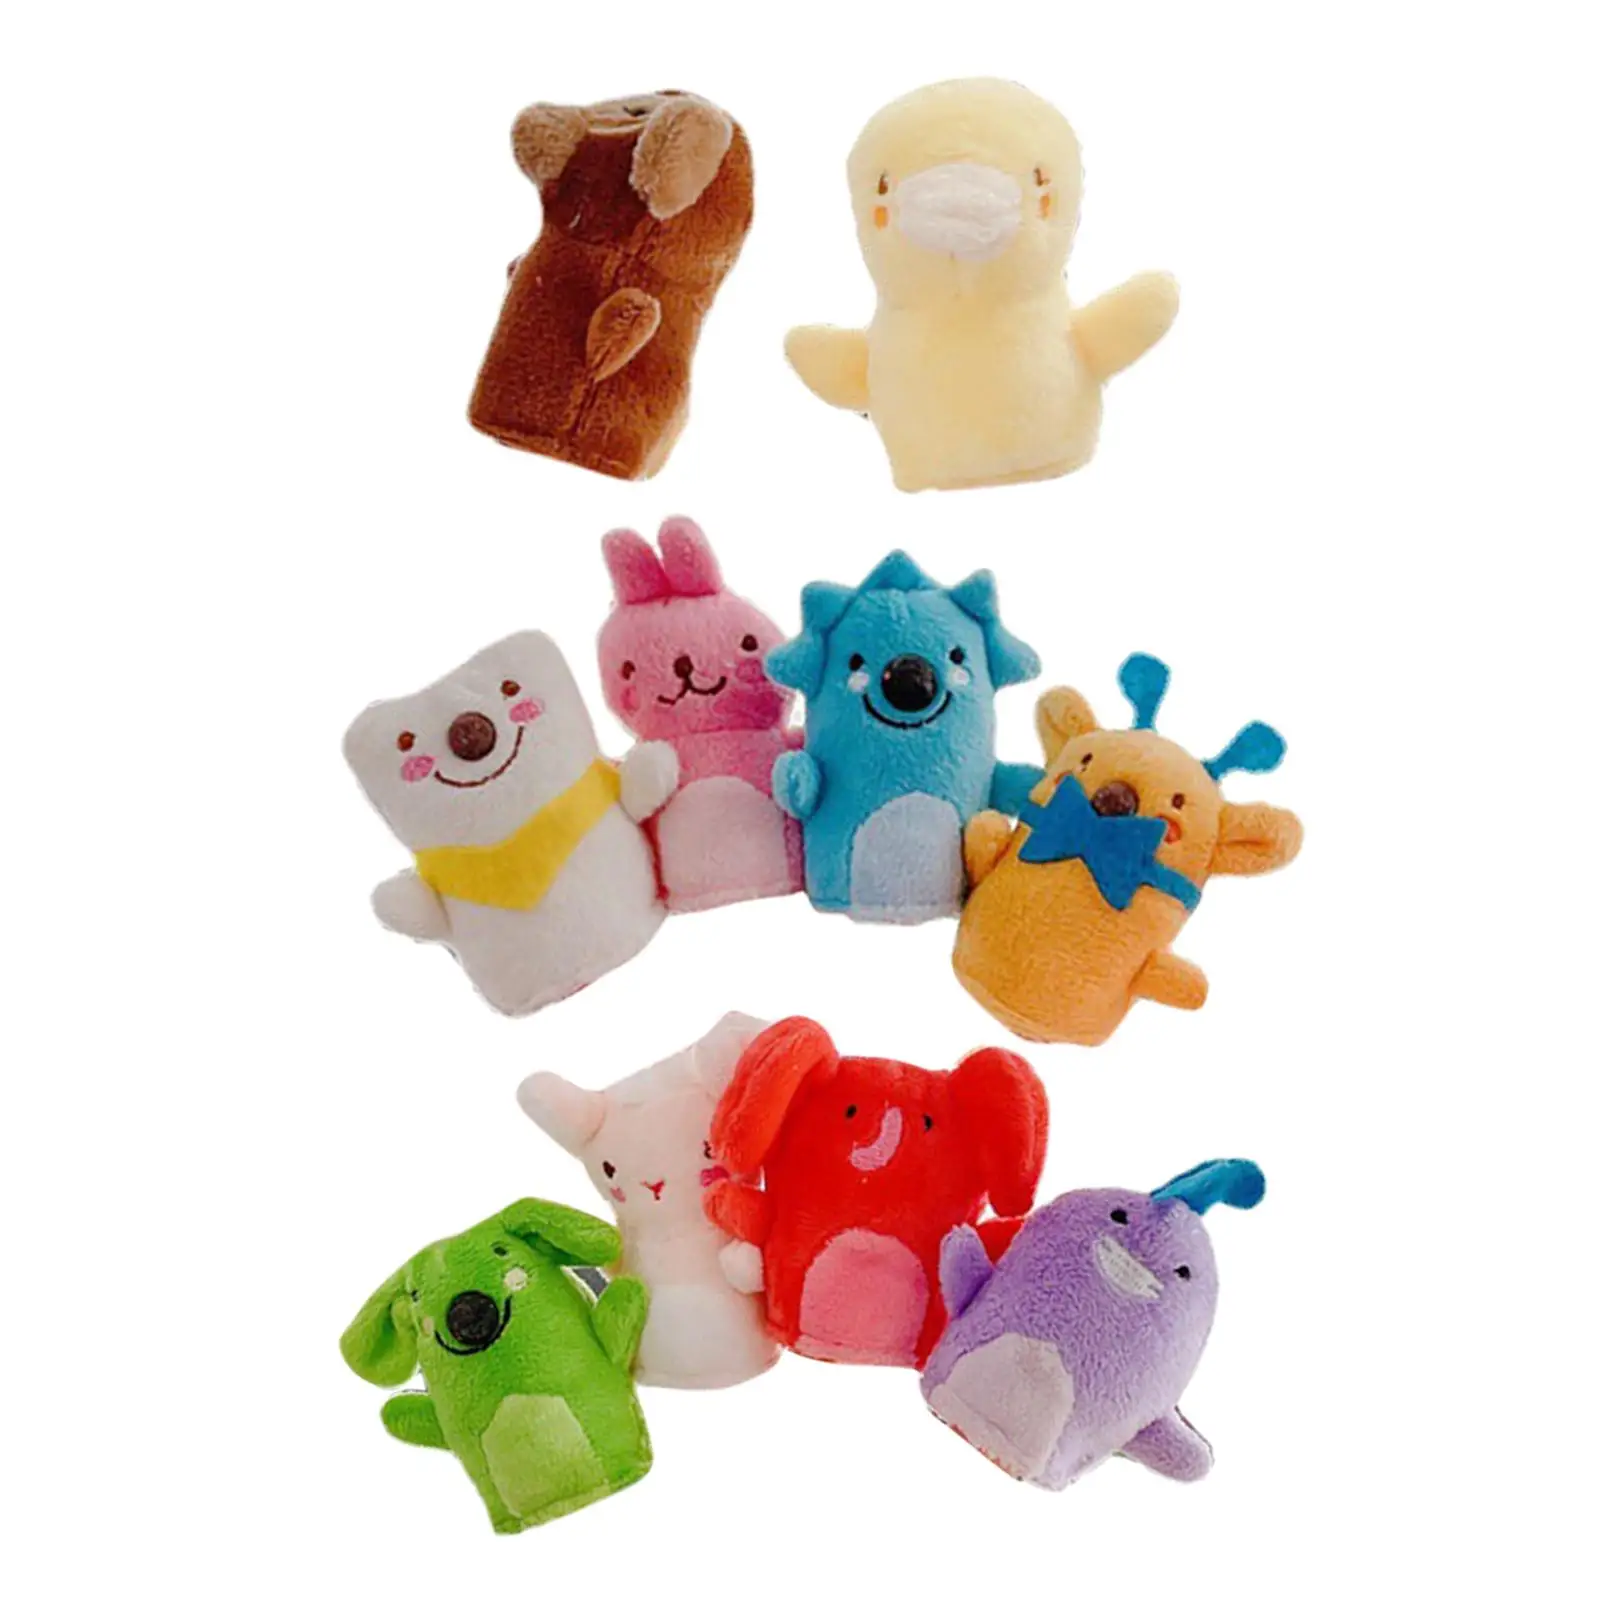 10x Finger Puppet Beach Toys Adorable Novelty Educational for Gifts Toddler